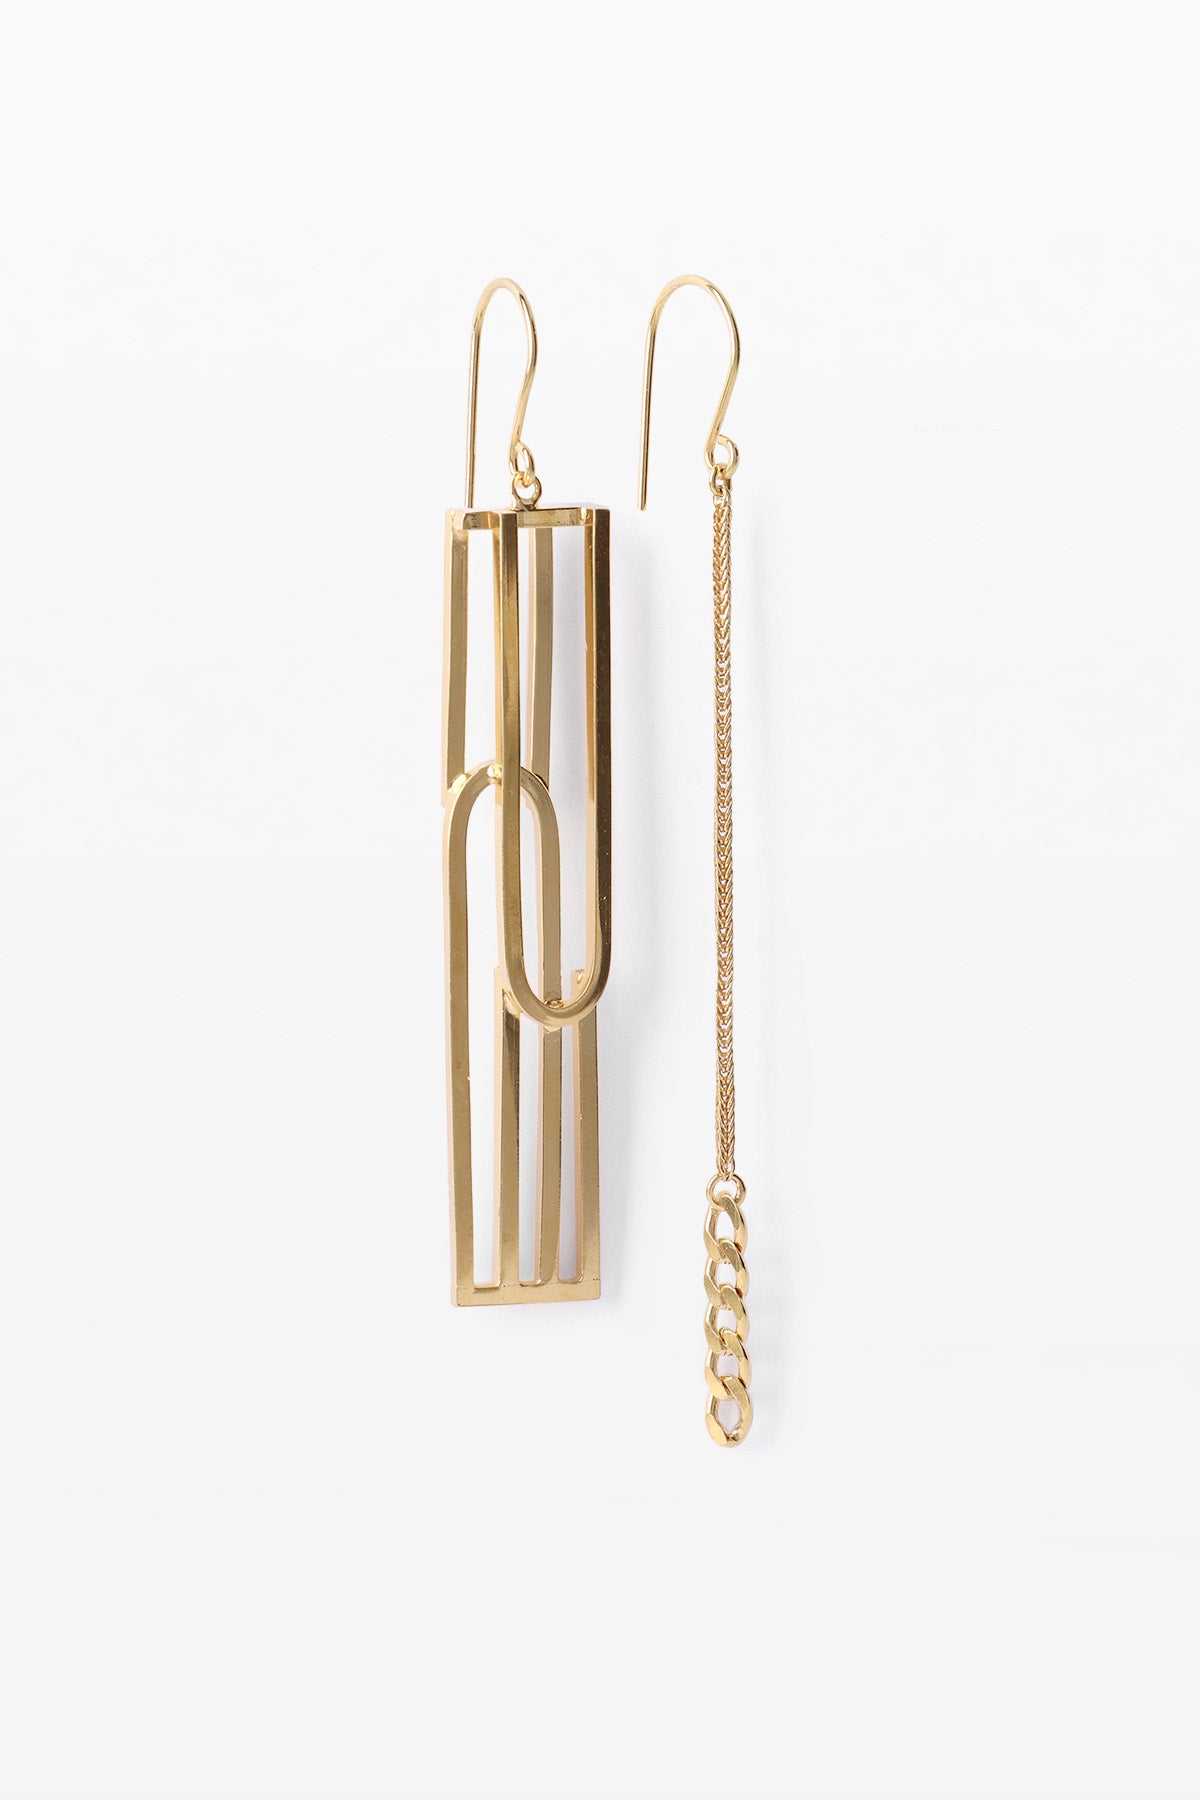 Forma Earring 09 Gold Plated Silver